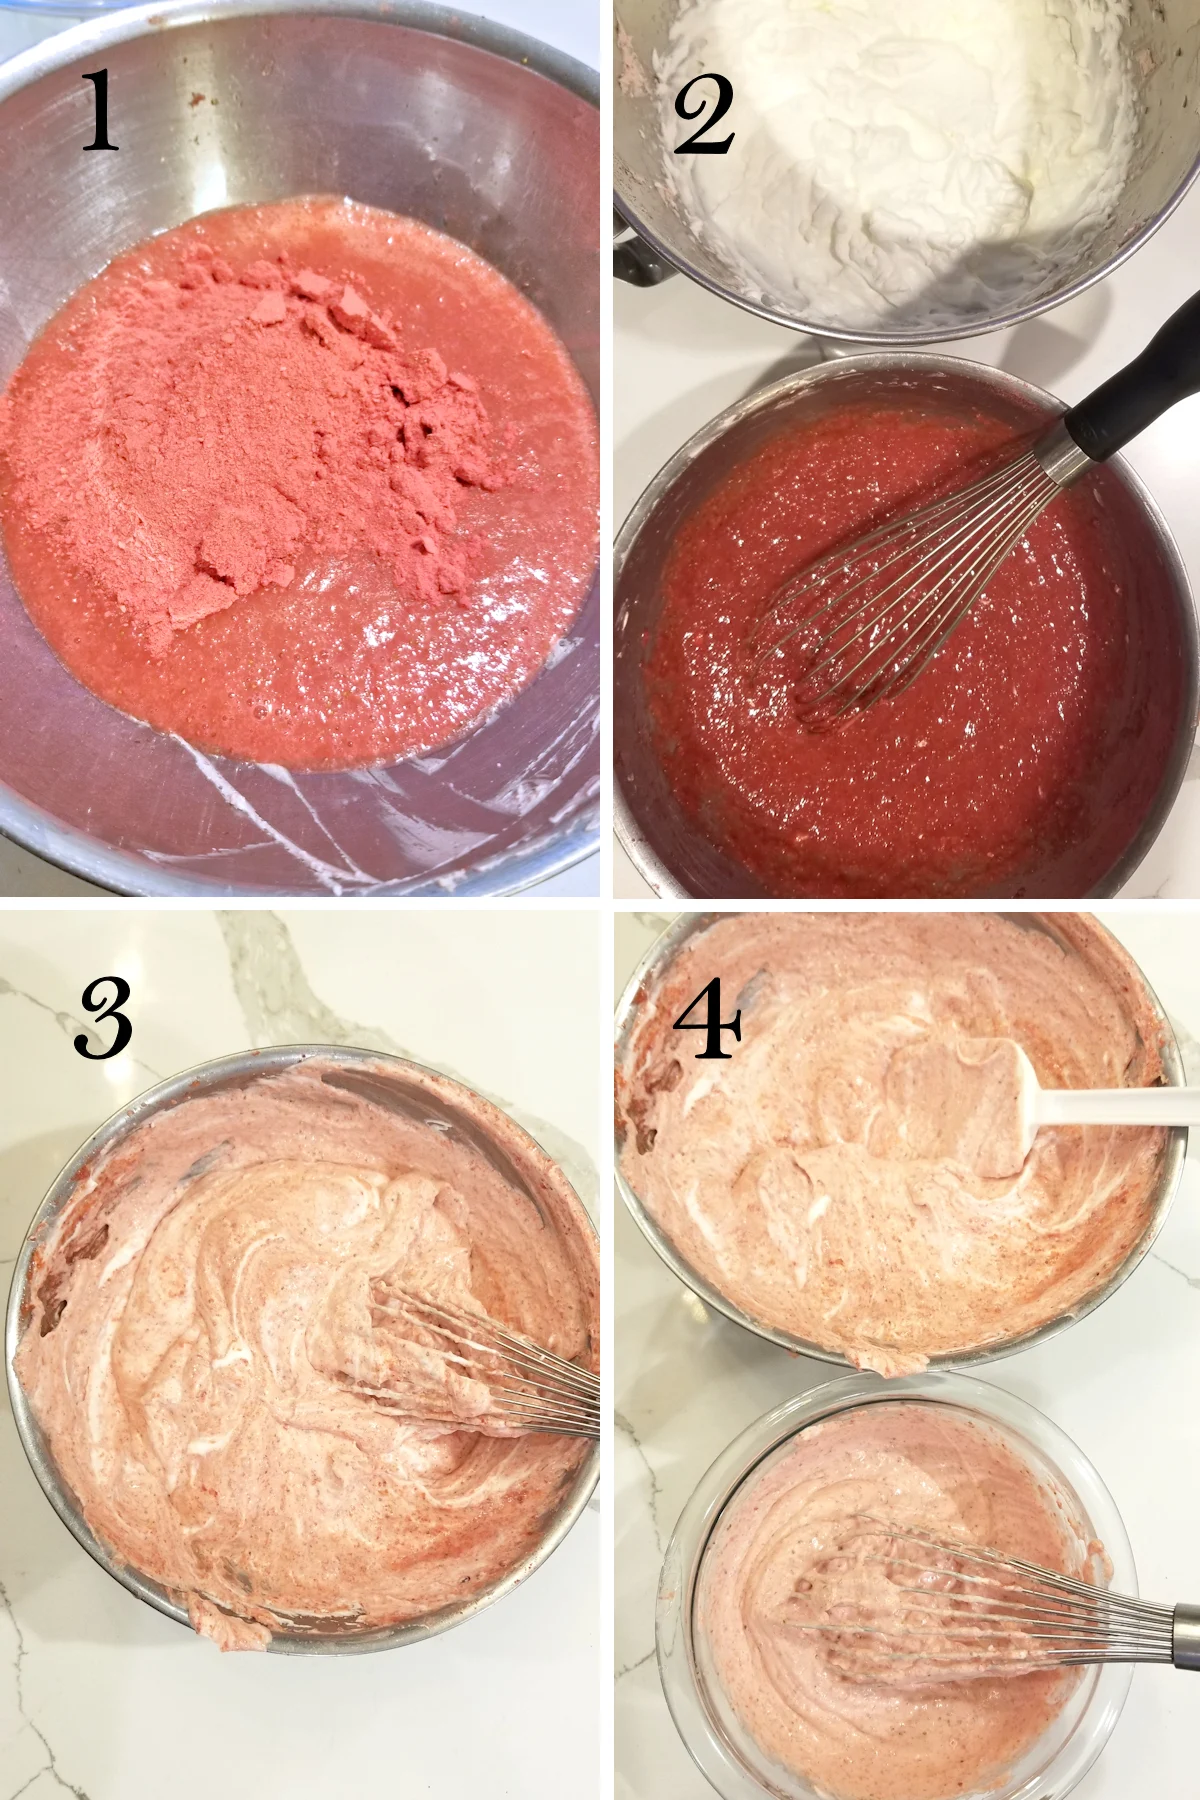 1. Strawberry puree with strawberry powder in a bowl. 2. A bowl of strawberry puree and a bowl of whipped cream. 3. A bowl of strawberry mousse. 4. A bowl of mousse and a bowl of gelatin.